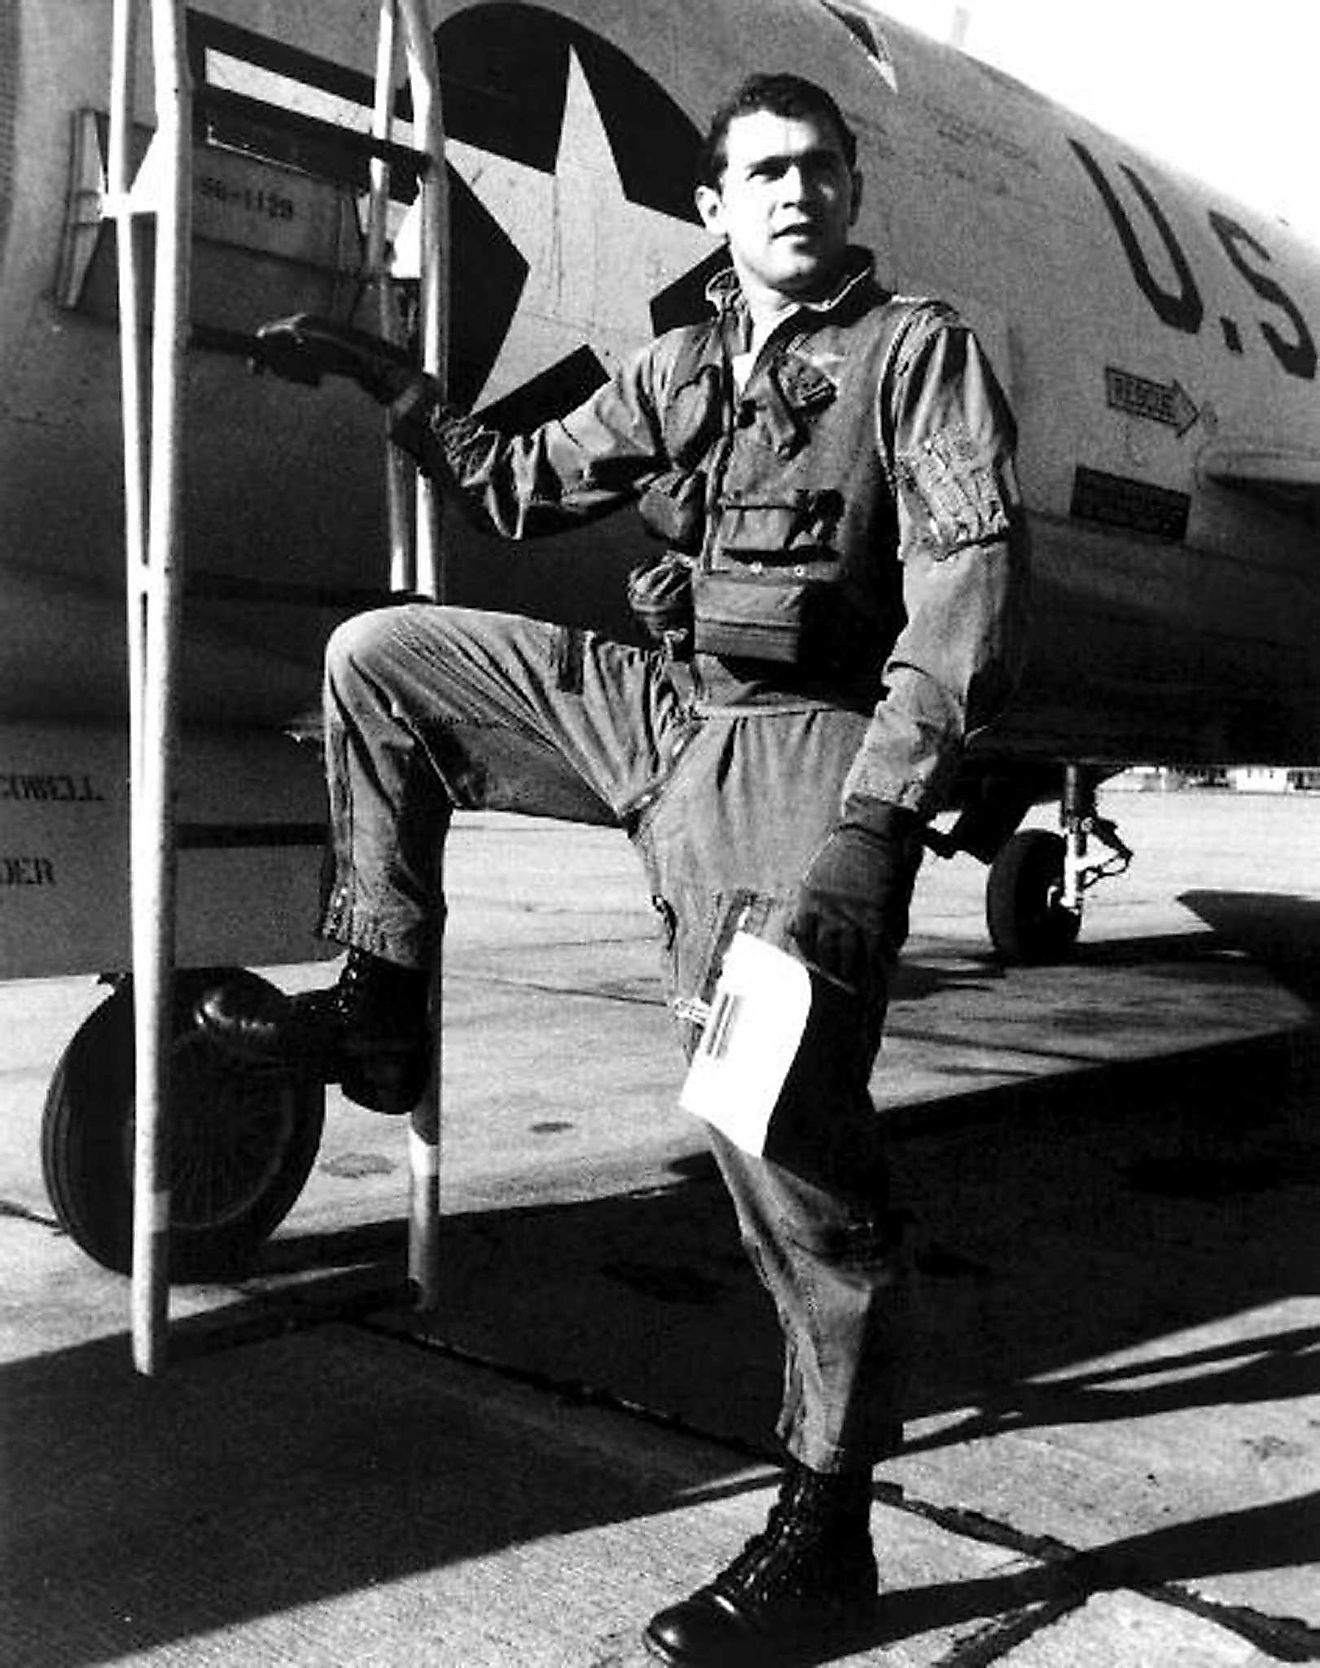 Bush is shown climbing the steps to his Texas National Guard fighter plane in this undated photo. Image credit: Flickr.com